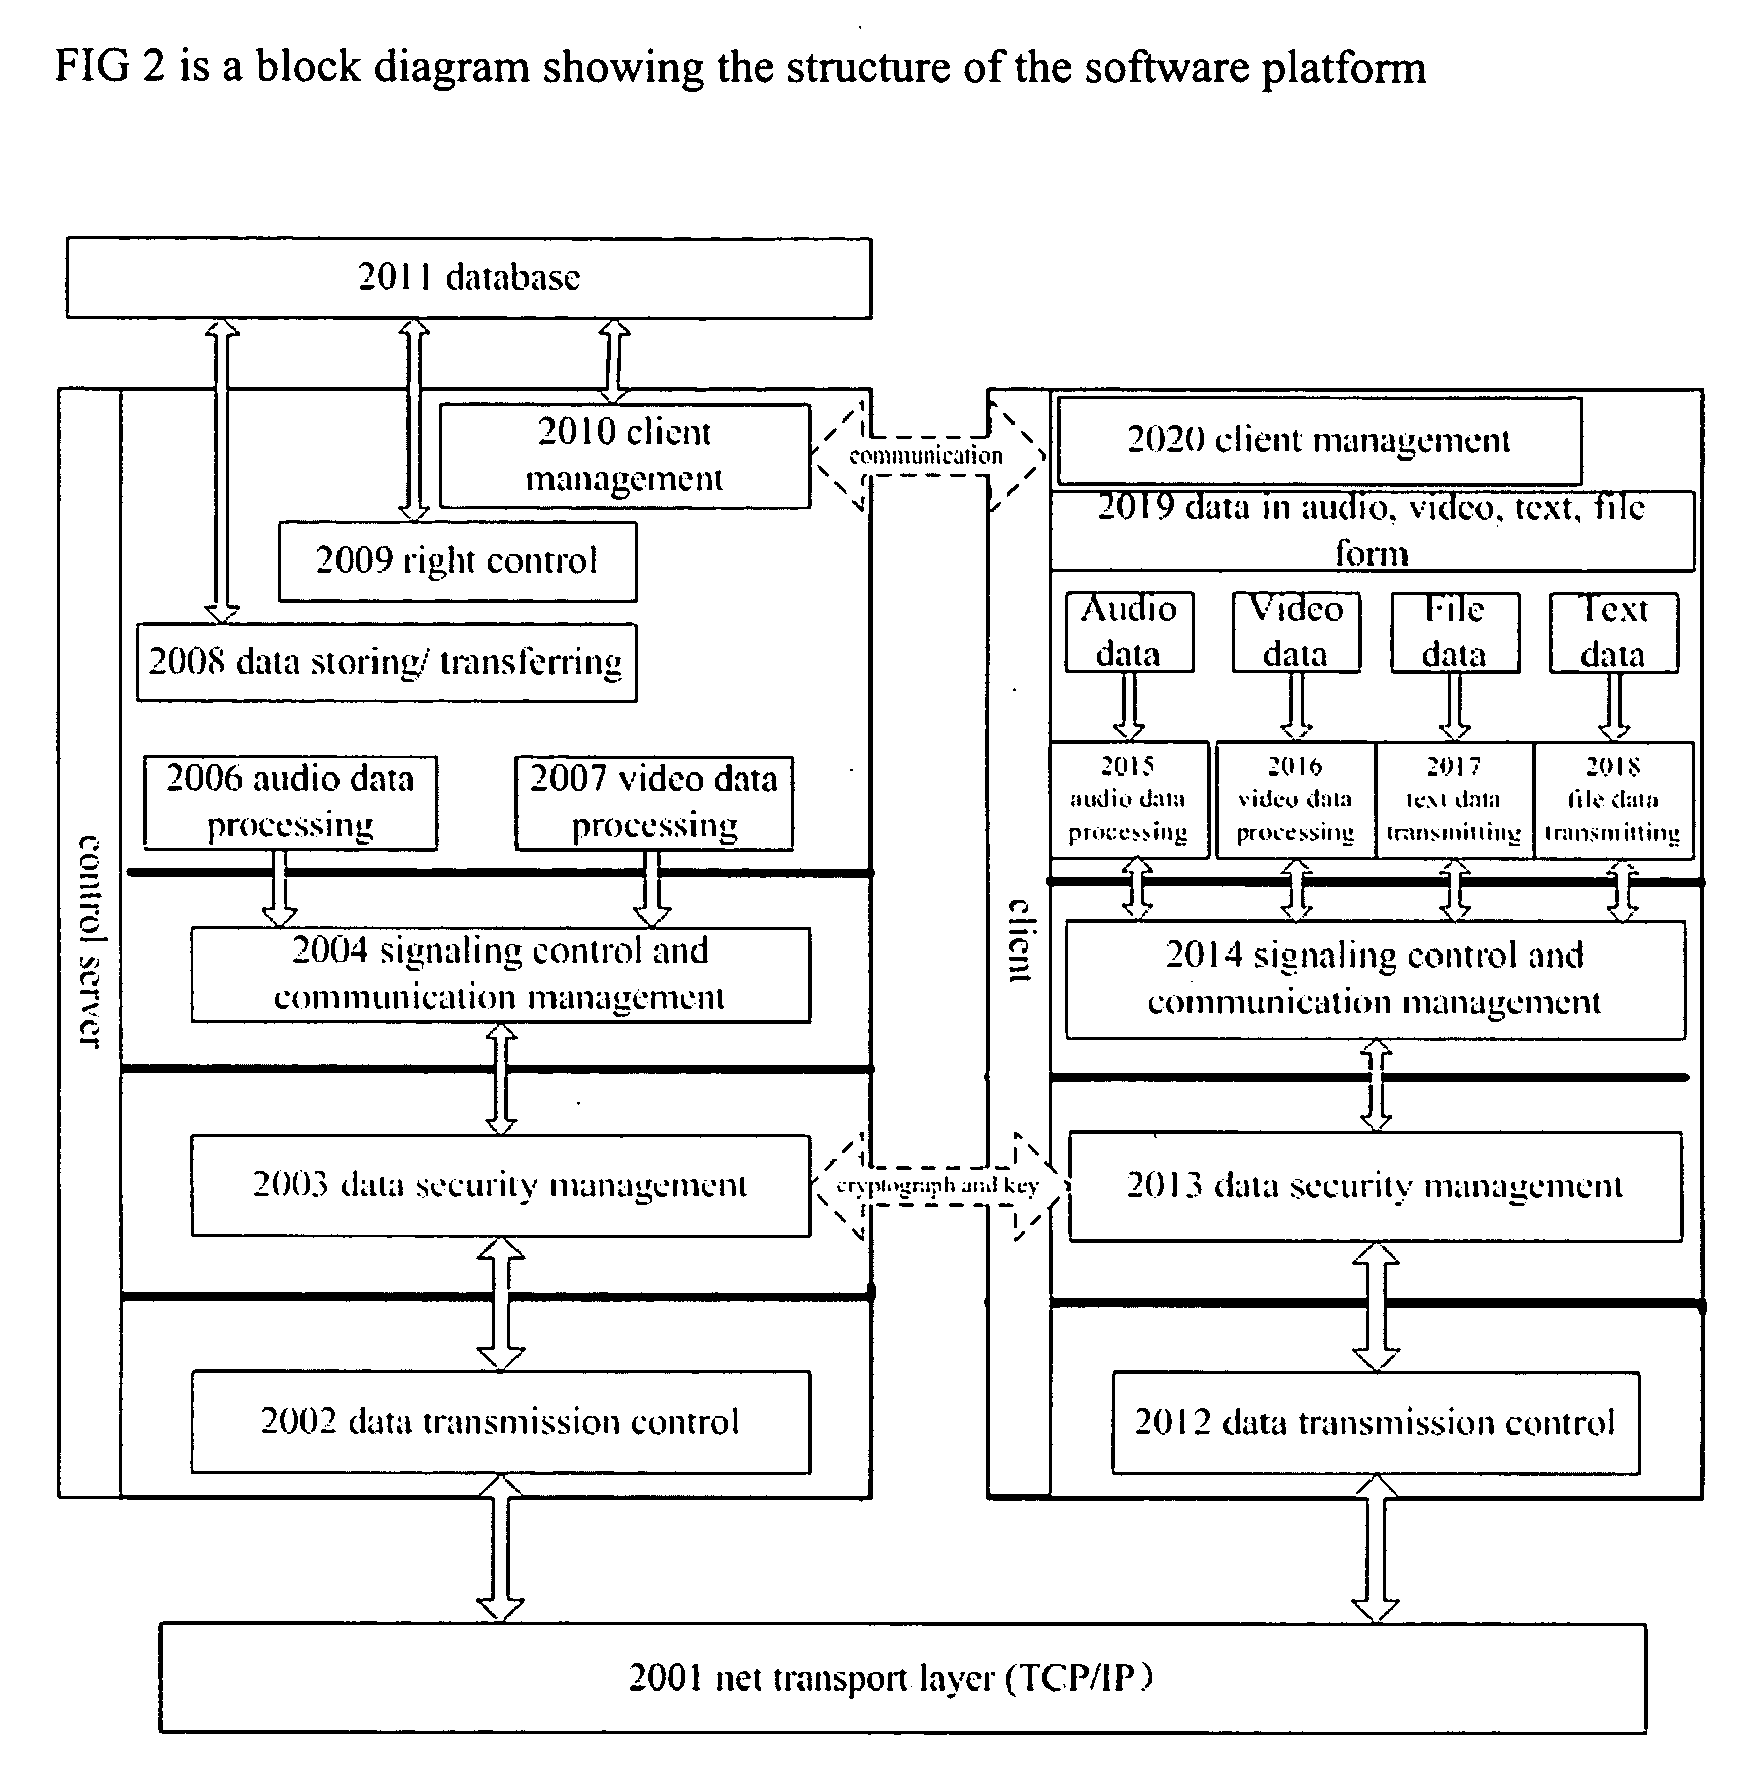 System and method for calling and communication based on search engine